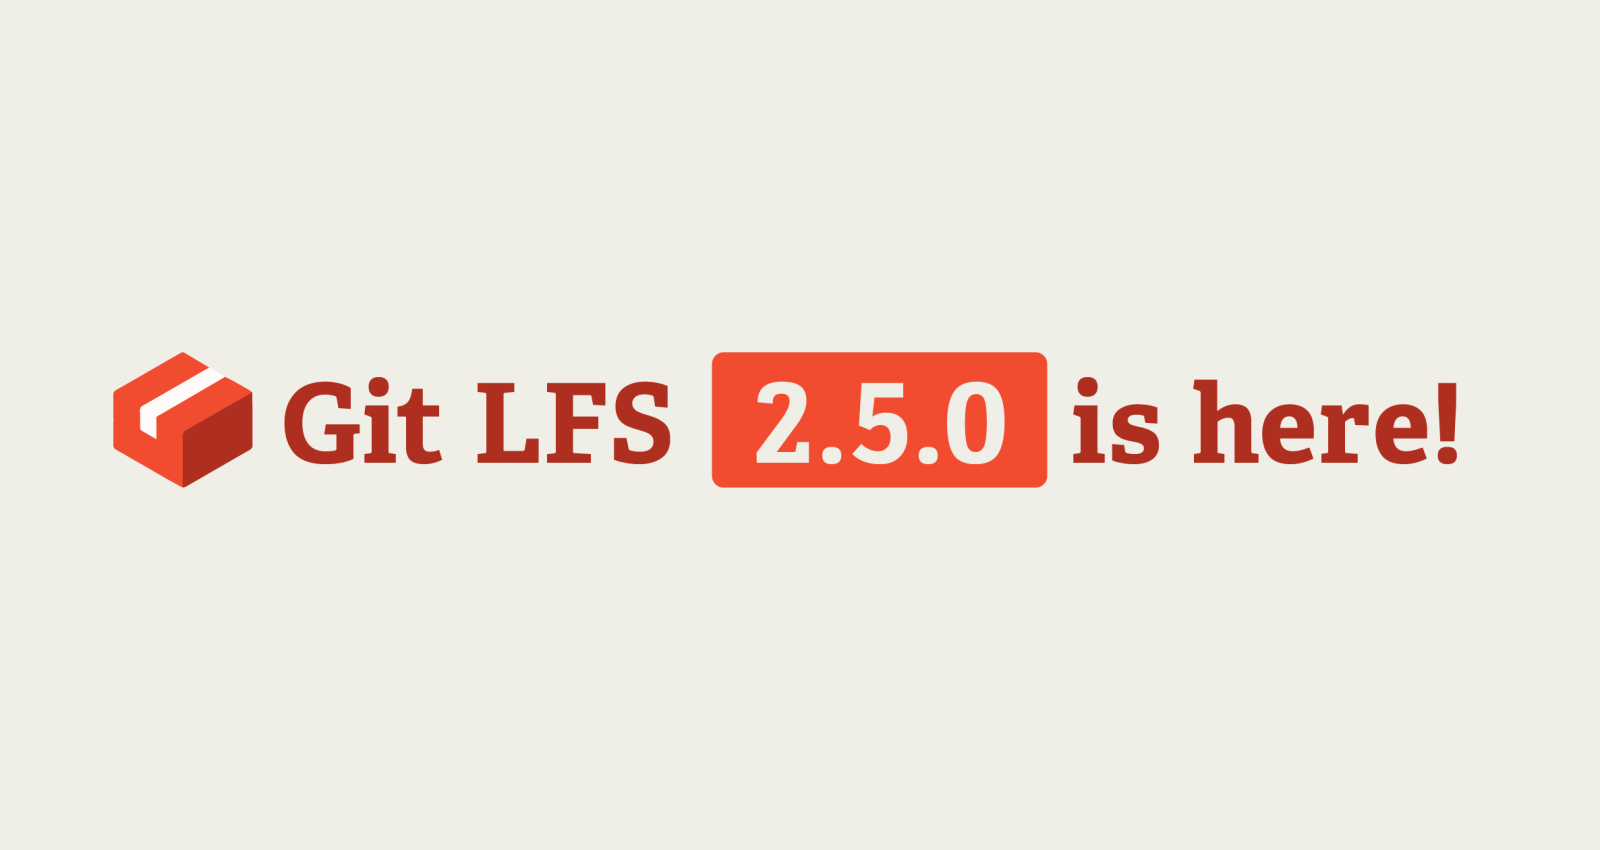 Git LFS 2.5.0 is now available